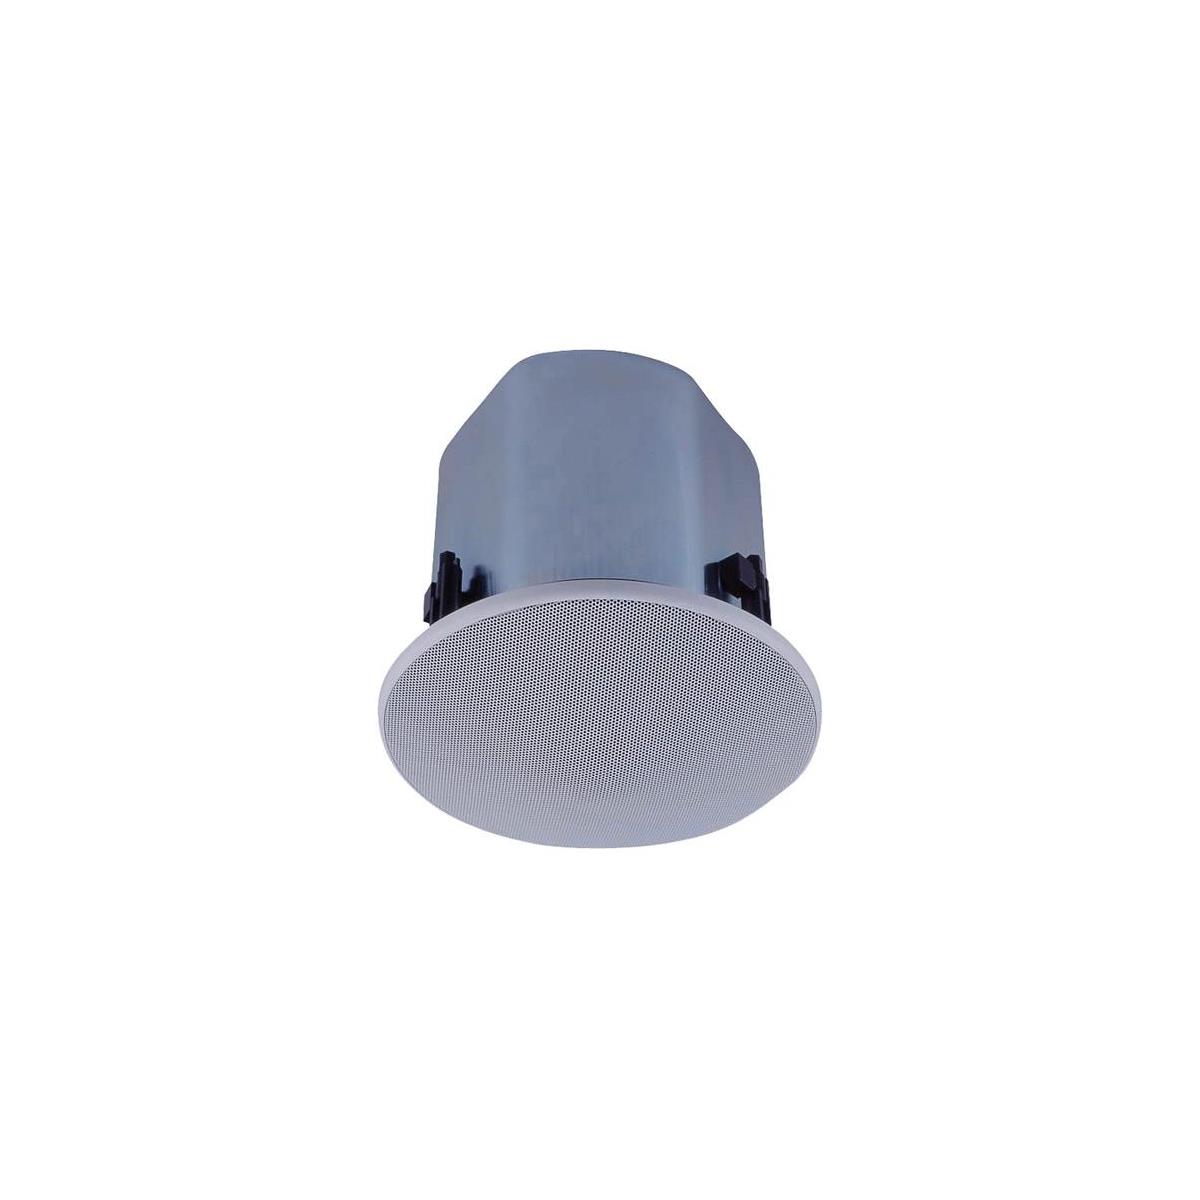 Image of TOA Electronics 5 Co-axial 30W Ceiling Speaker with Tile Bridge